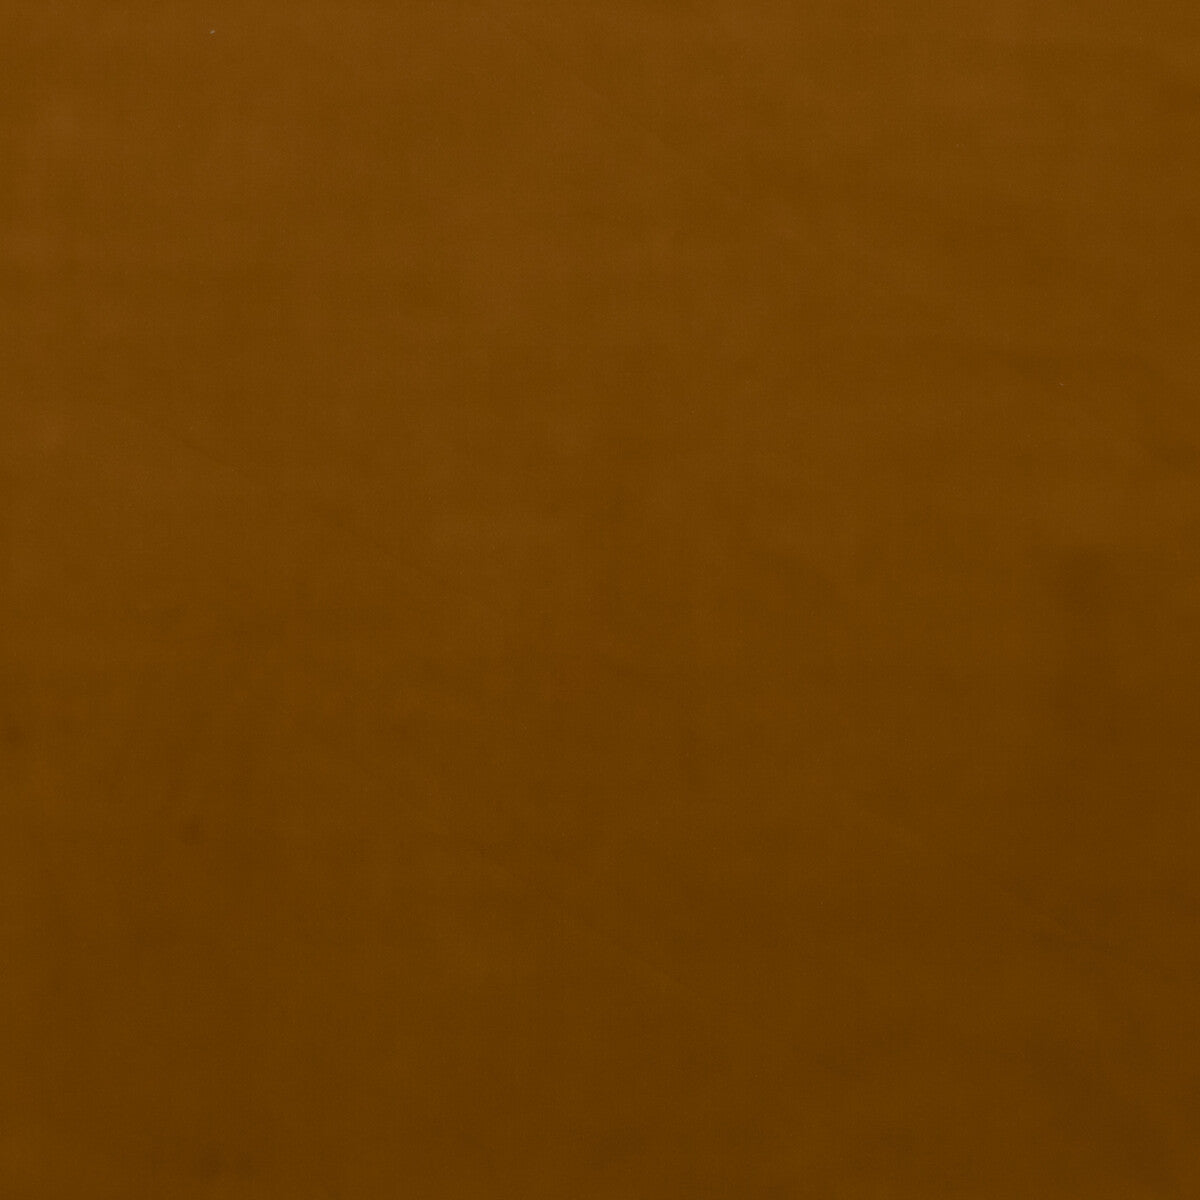 Mulberry Velvet fabric in sienna color - pattern FD800.M30.0 - by Mulberry in the Mulberry Velvet collection